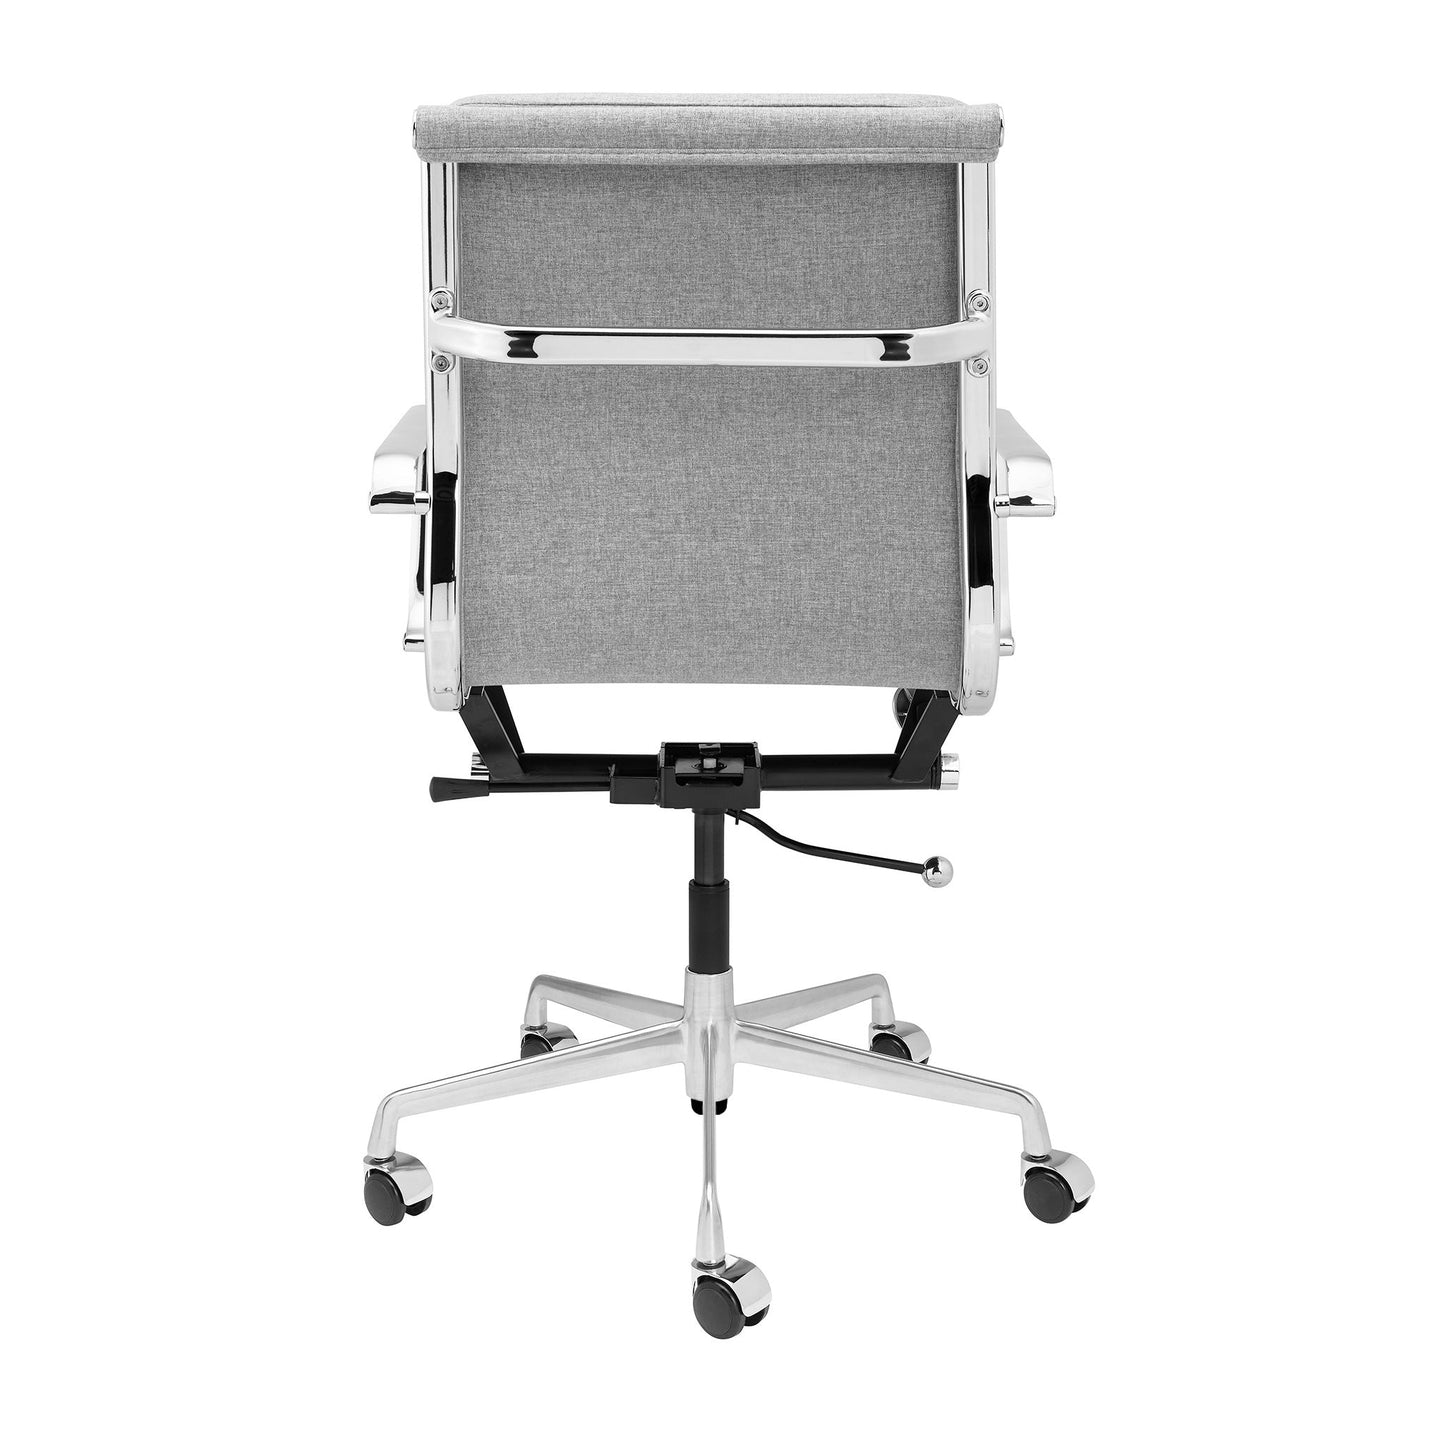 Classic SOHO Soft Padded Management Chair (Grey Fabric)